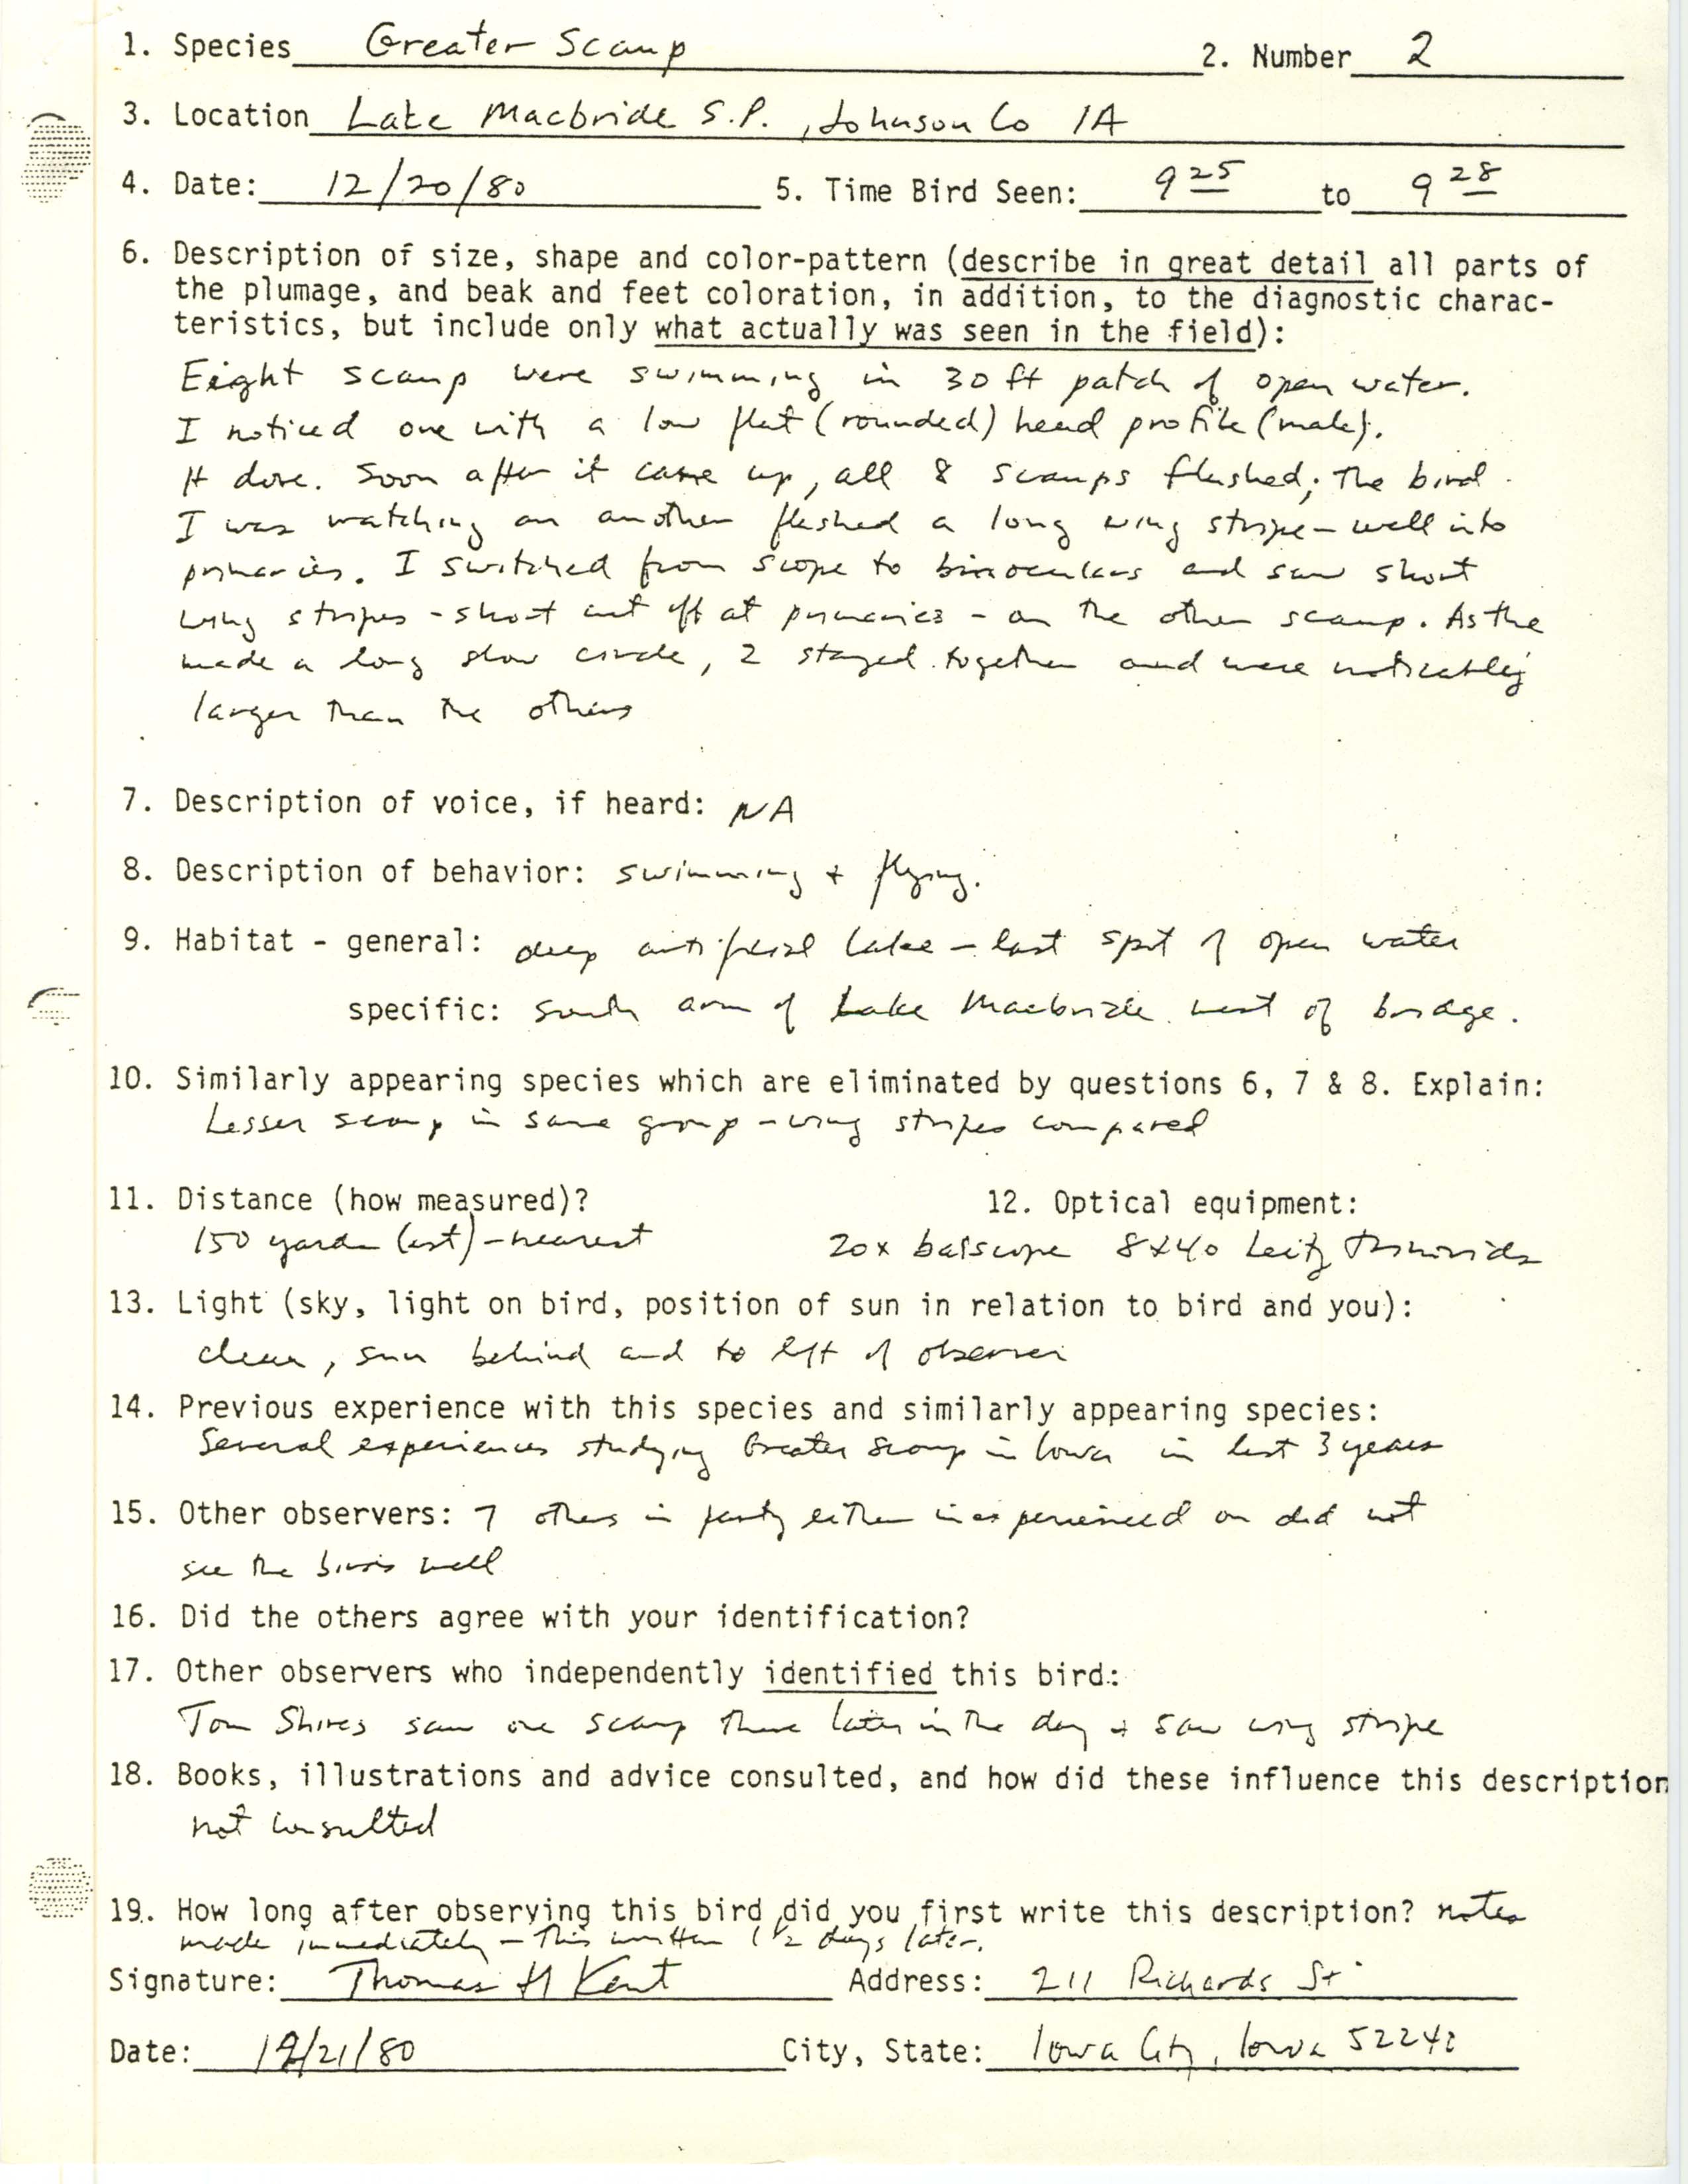 Rare bird documentation form for Greater Scaup at Lake Macbride State Park, 1980